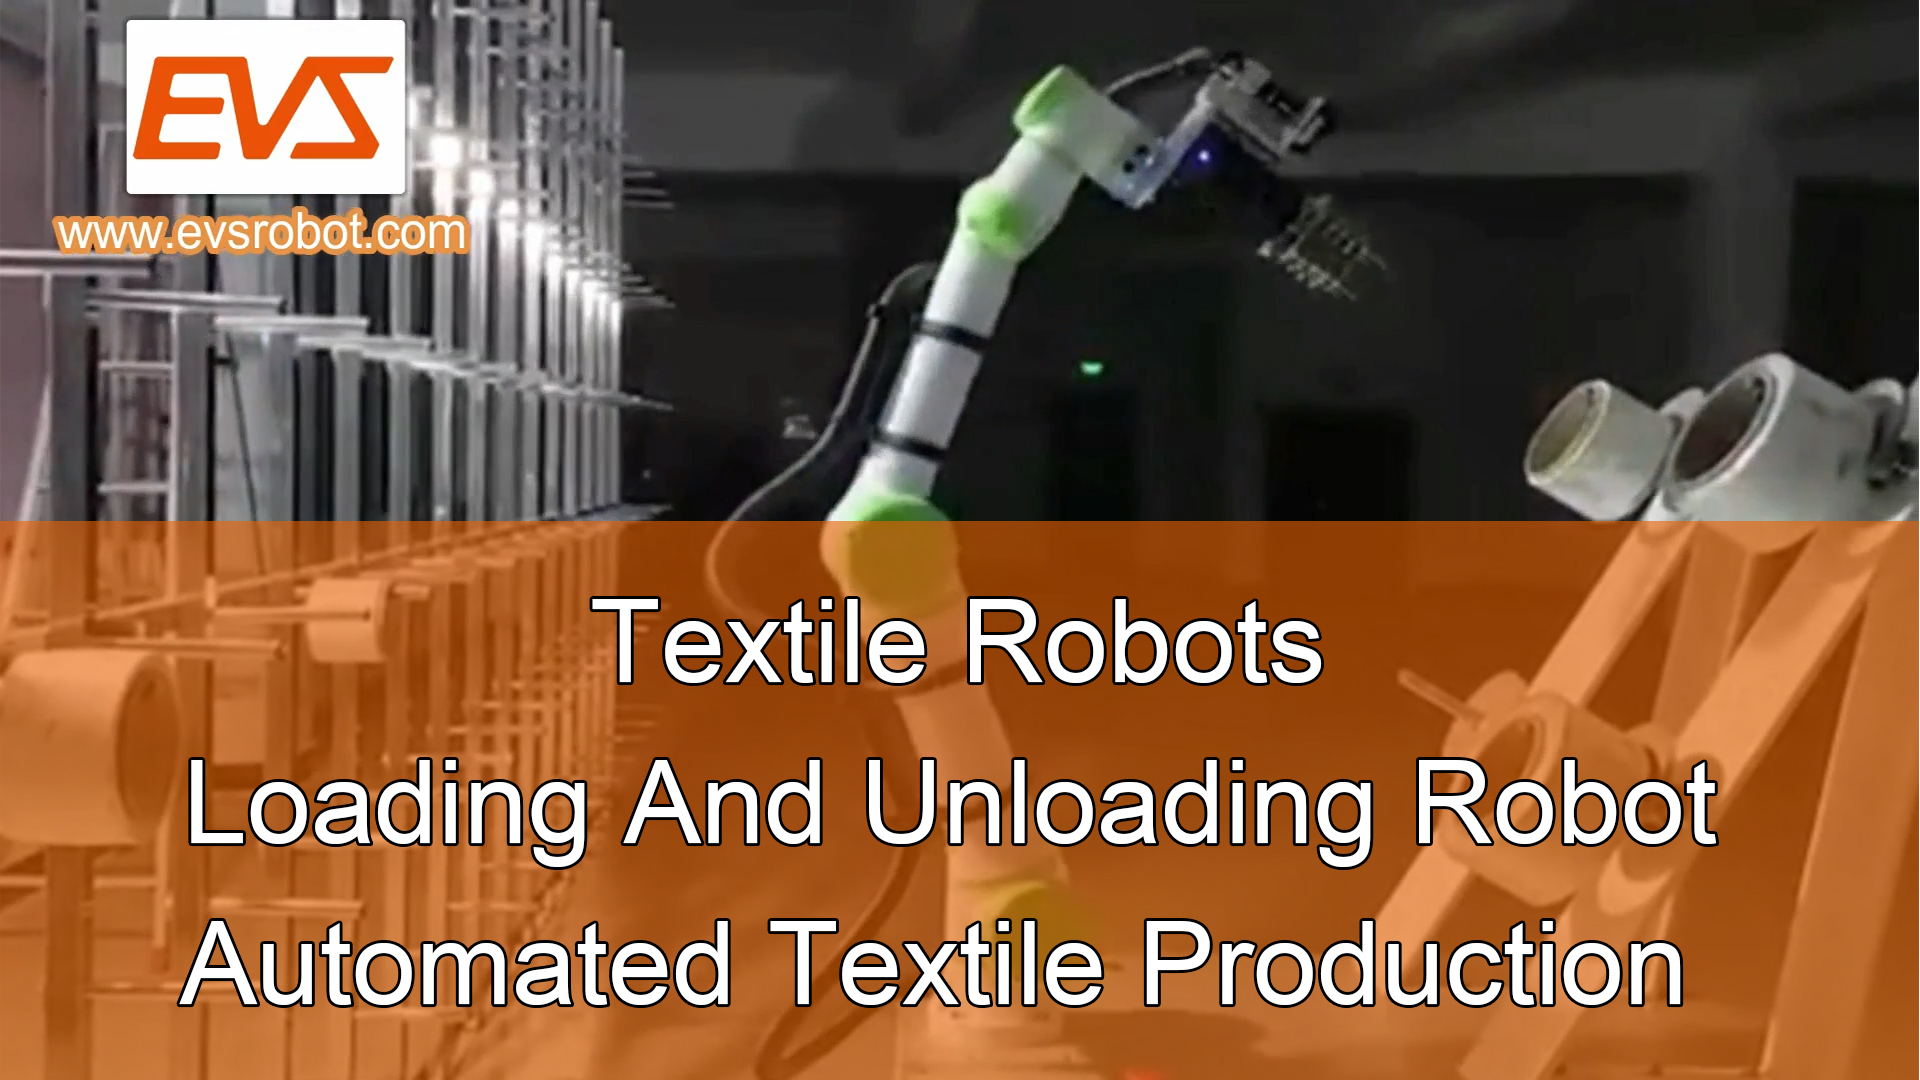 Textile Robots | Loading And Unloading Robot | Automated Textile Production